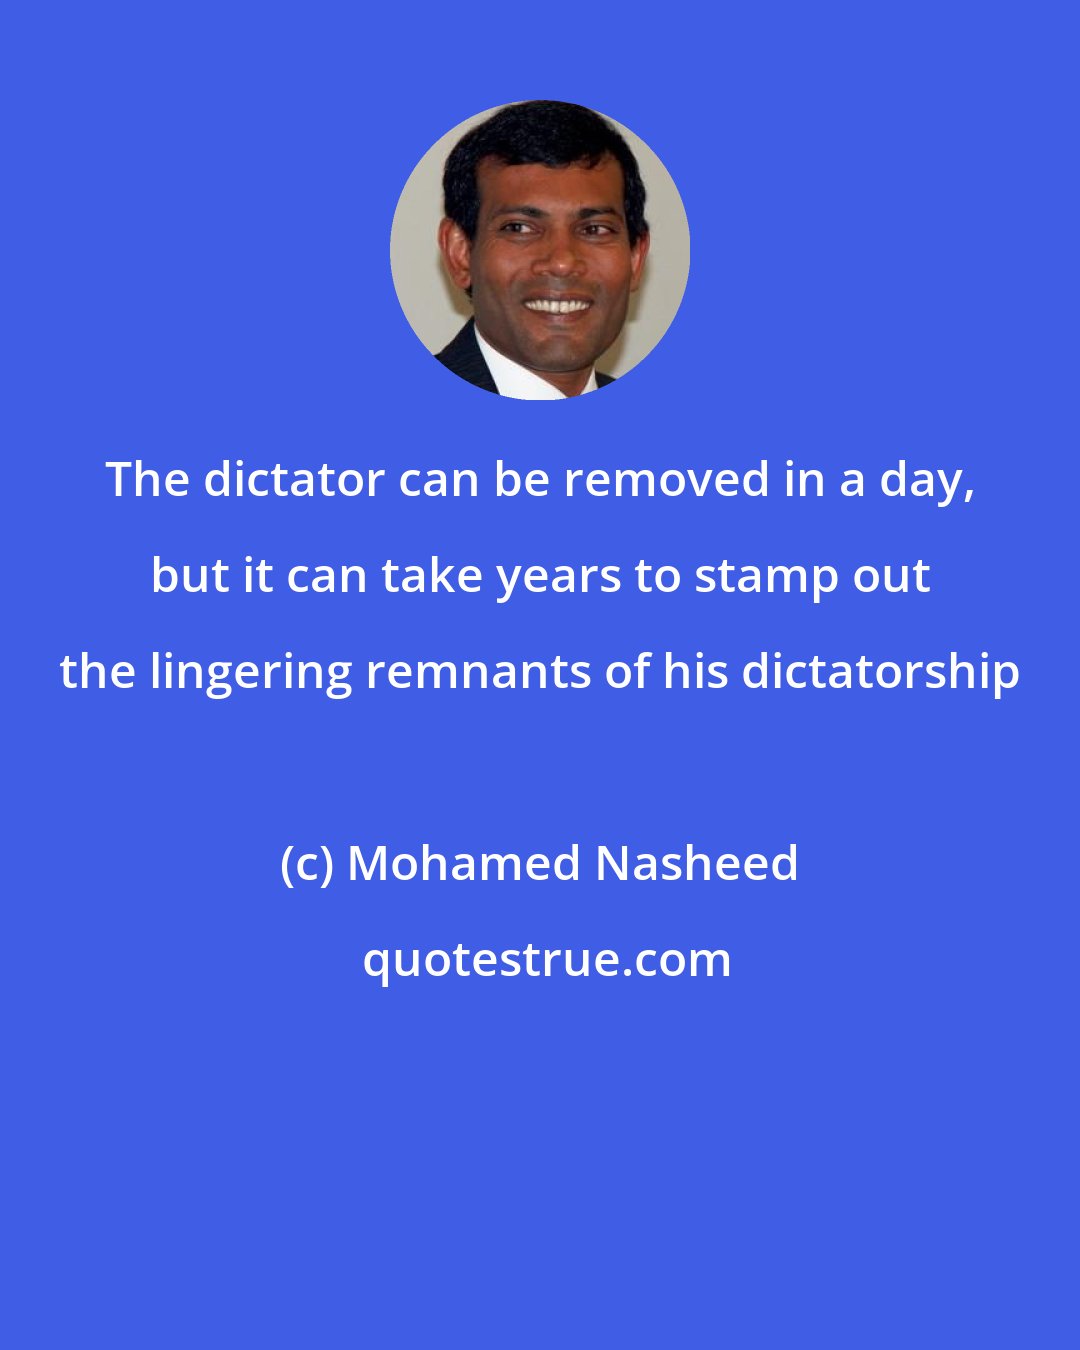 Mohamed Nasheed: The dictator can be removed in a day, but it can take years to stamp out the lingering remnants of his dictatorship